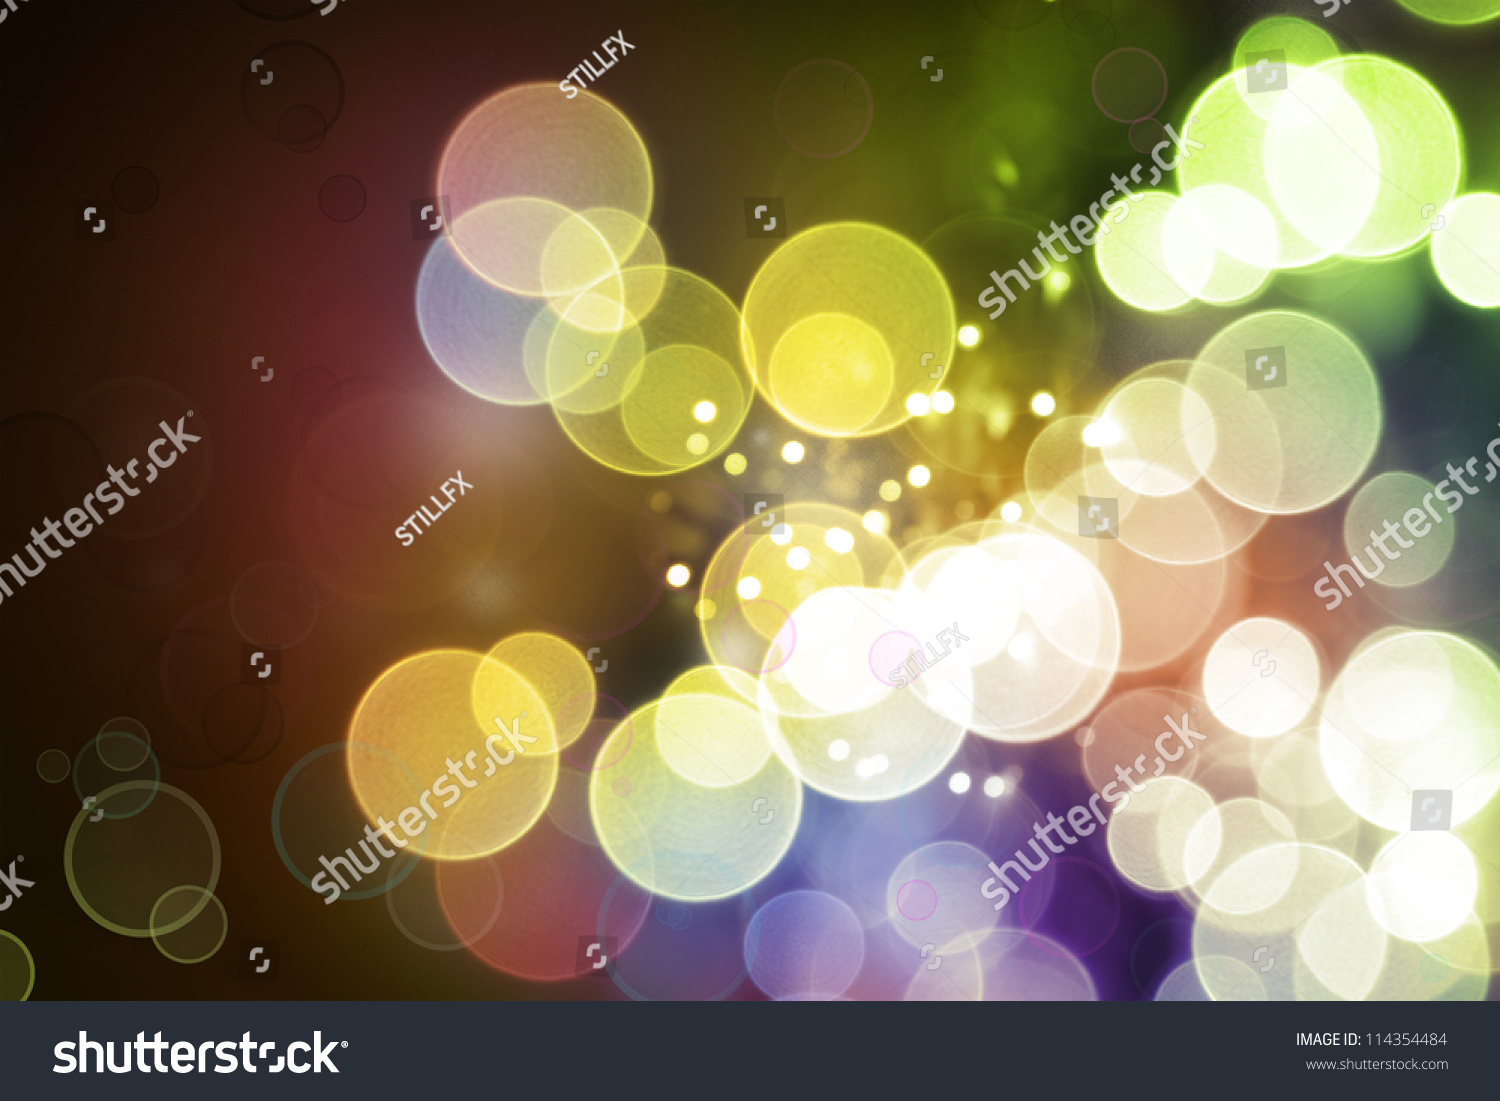 Colorful Circles Abstract Background Stock Photo 114354484 : Shutterstock